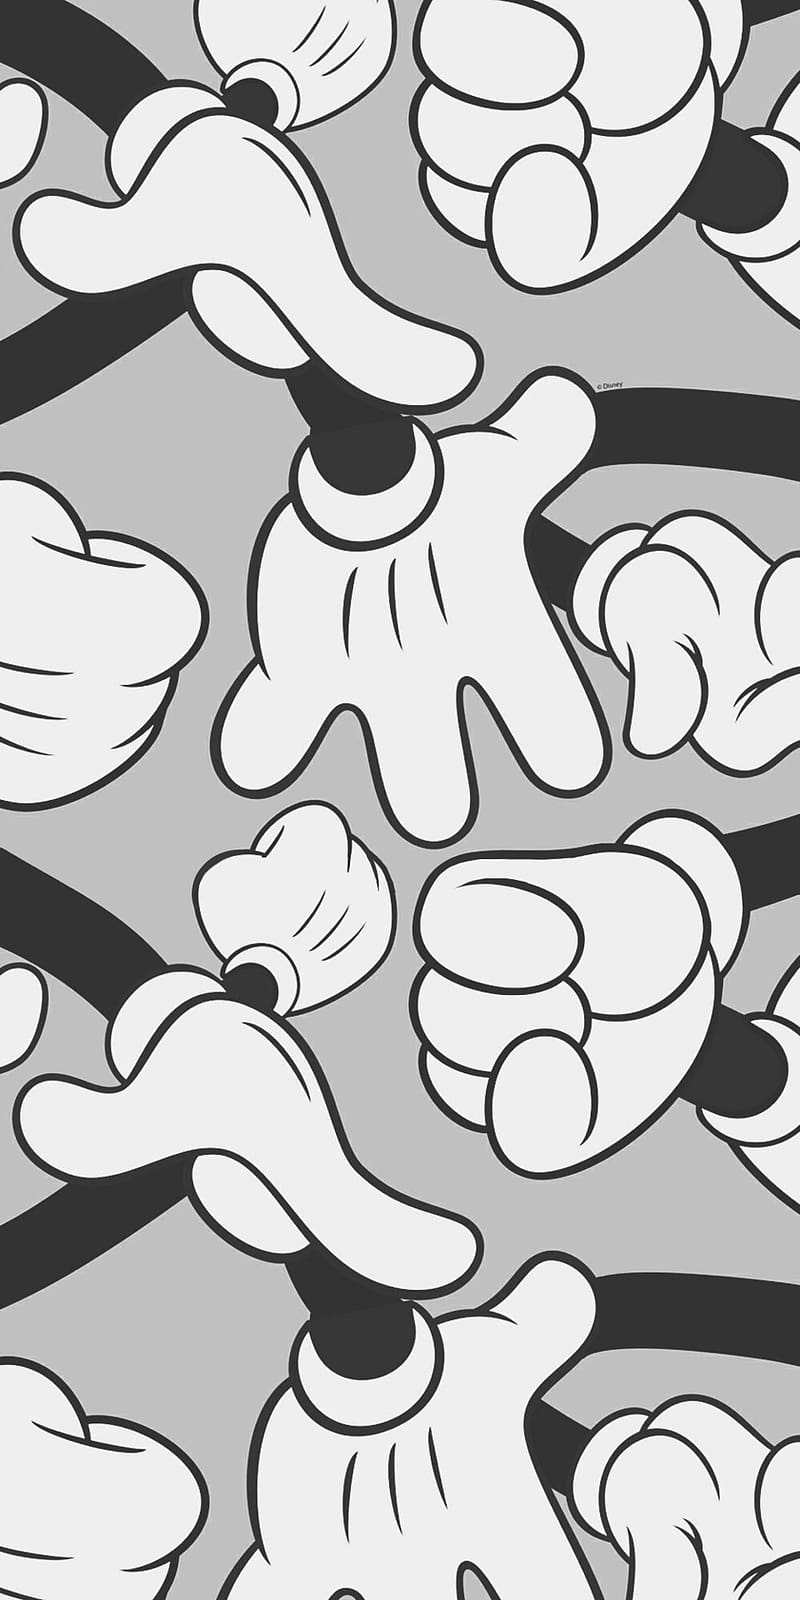 dope mickey mouse hands wallpaper